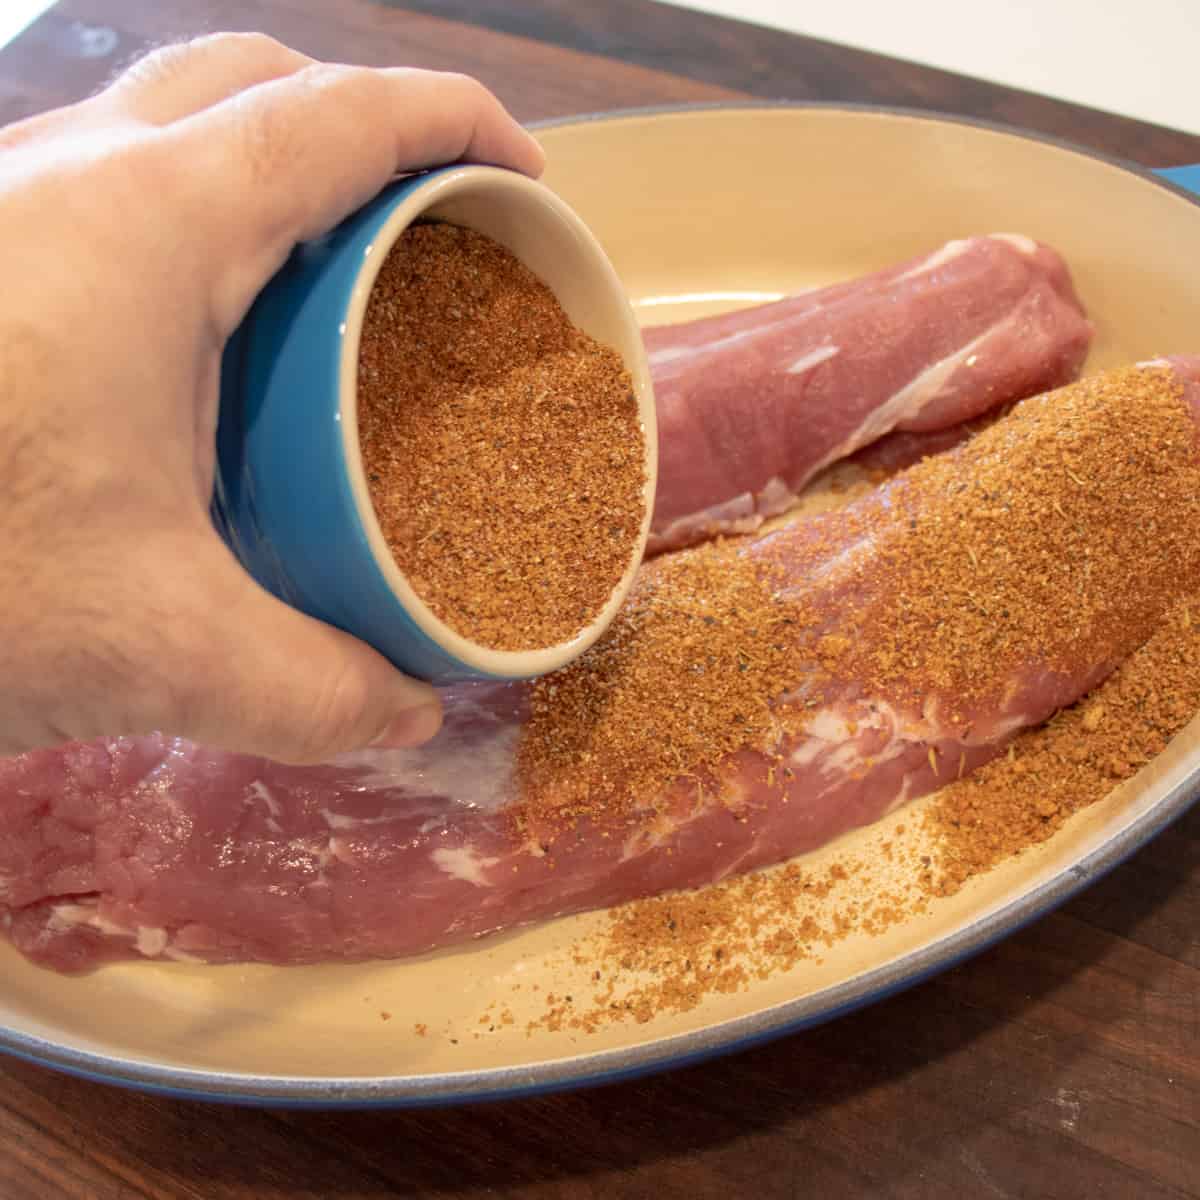 BBQ seasoning blend being sprinkled on the meat.